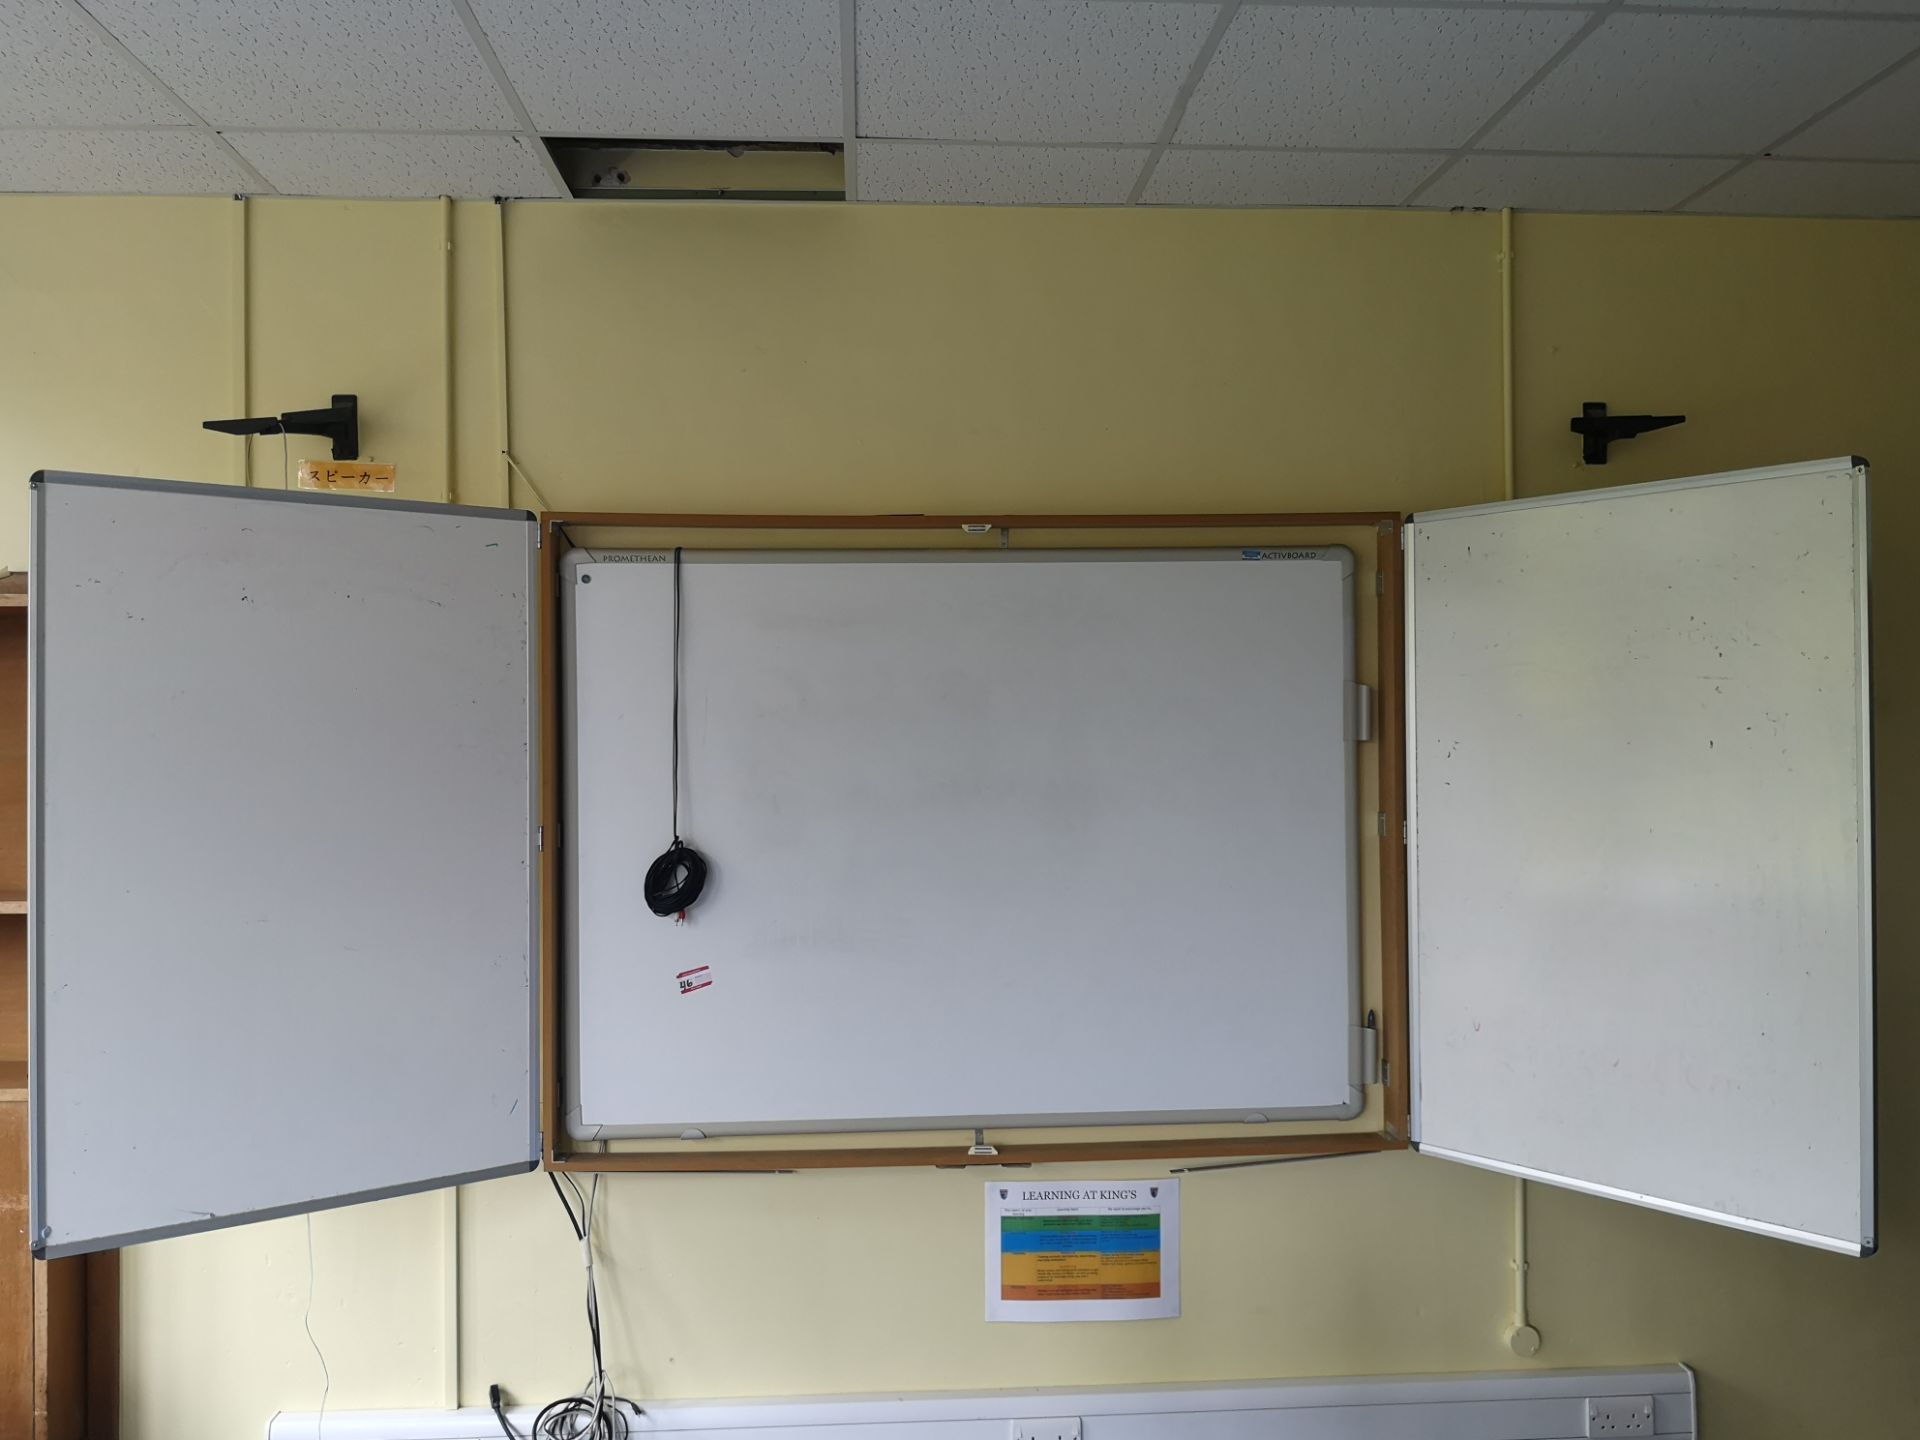 Promethean active board with whiteboards